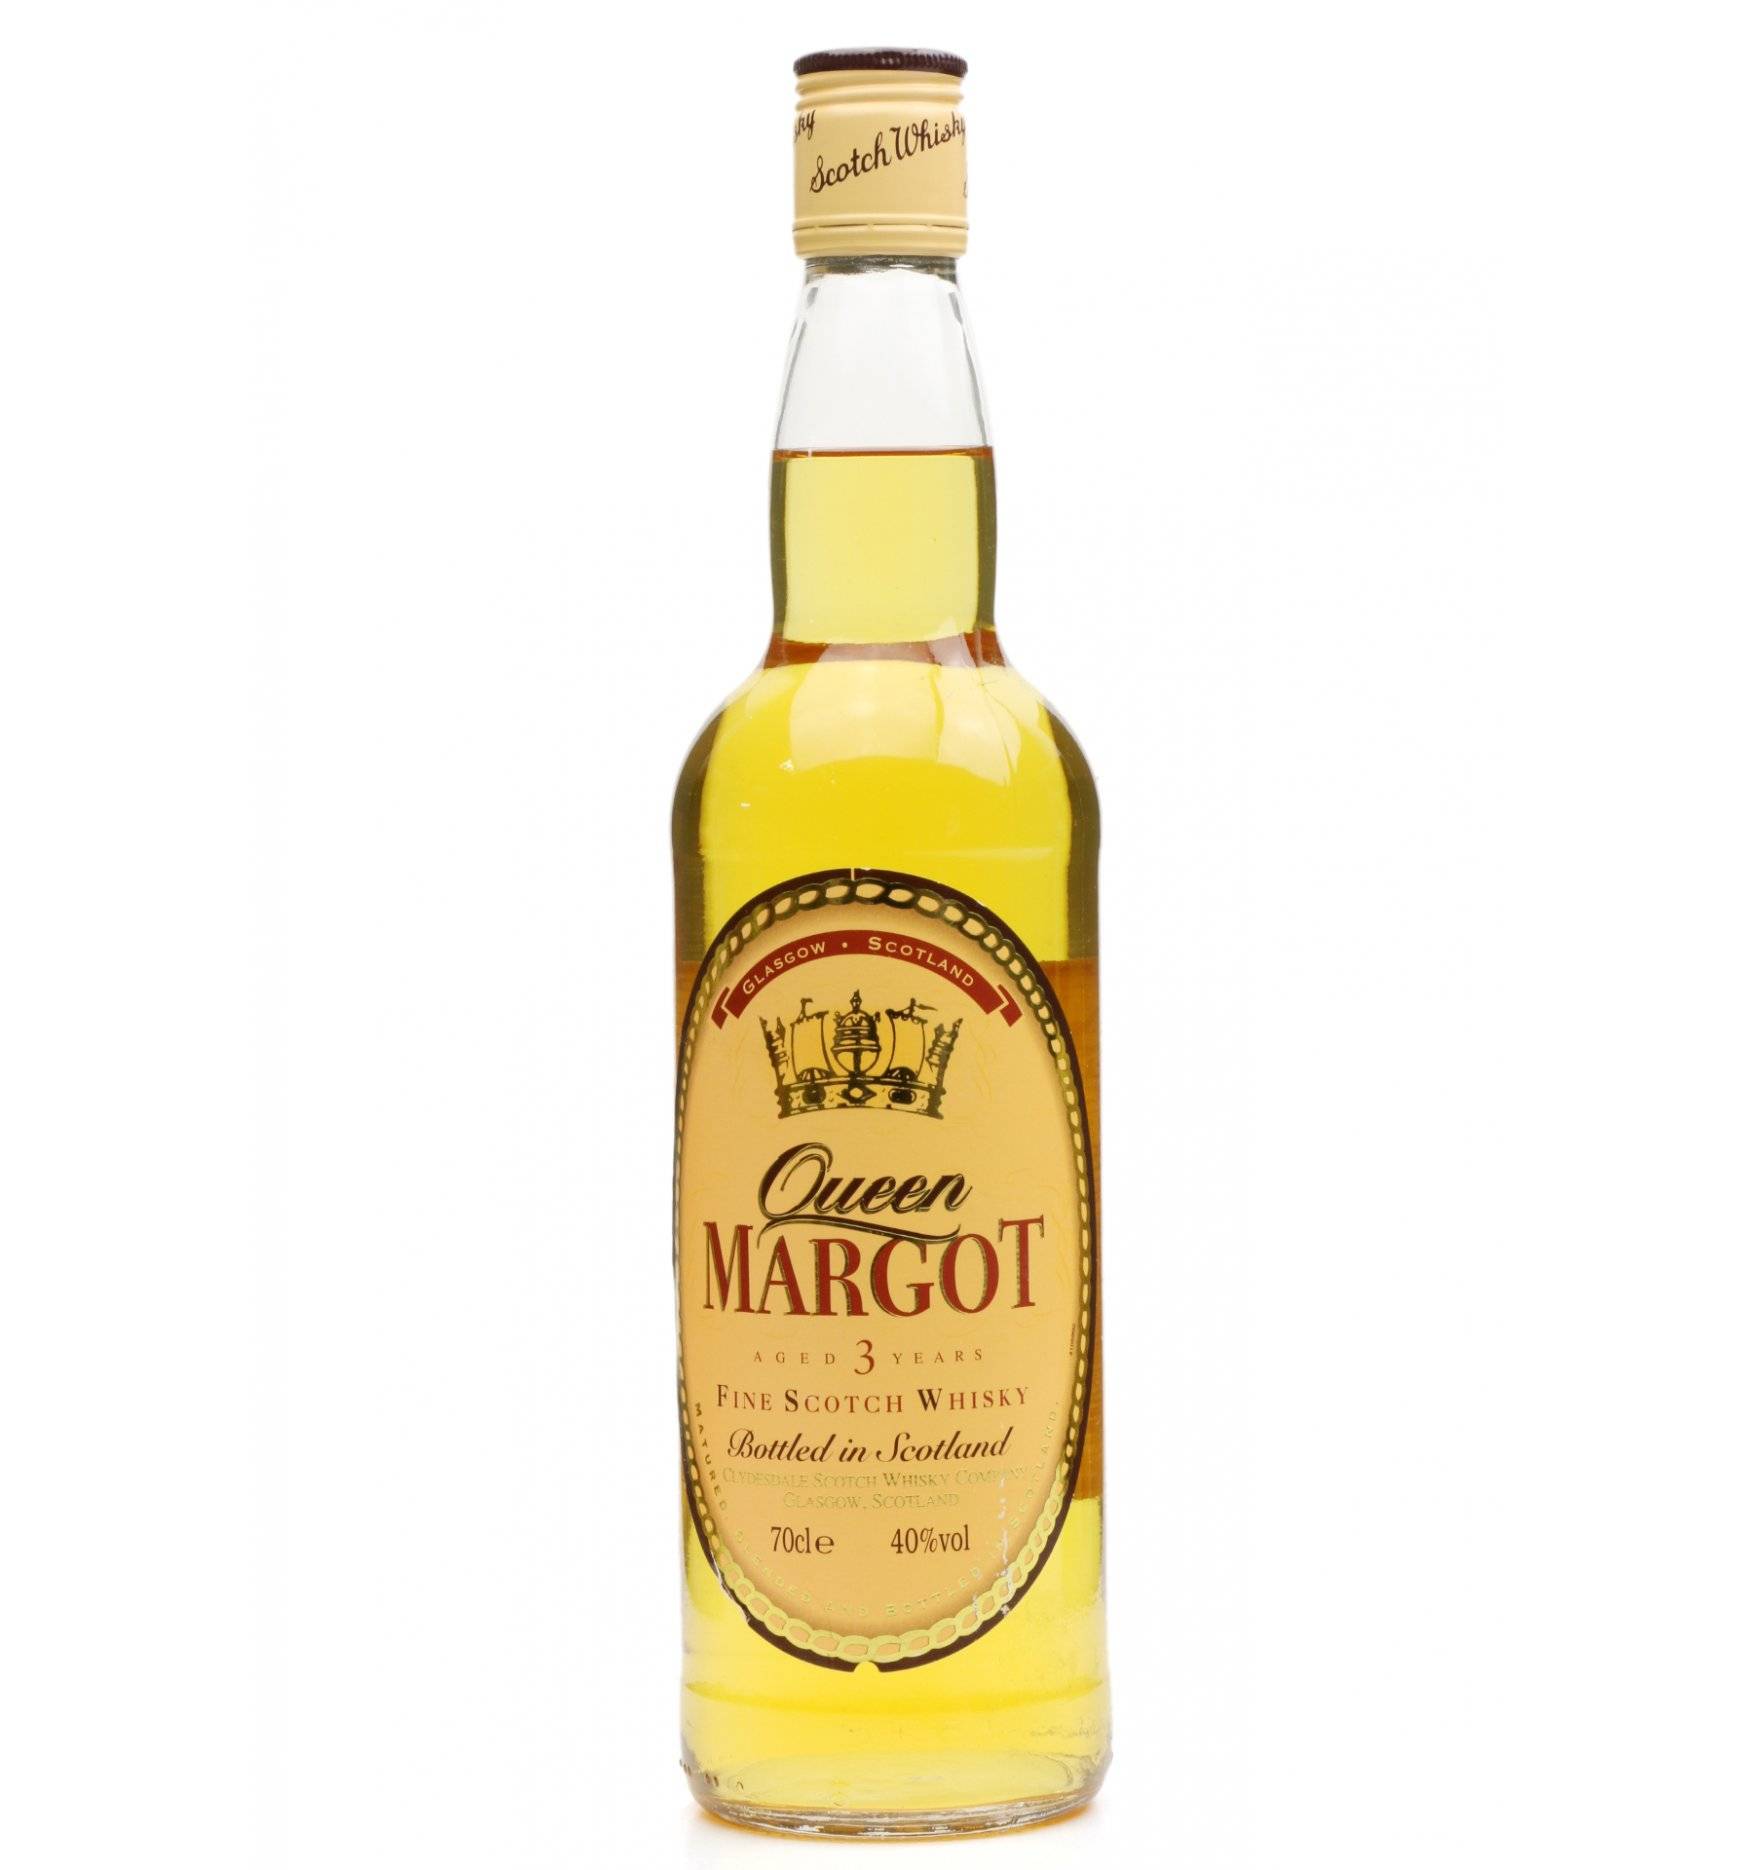 Queen Margot 3 Years Old - Scotch Whisky - Just Whisky